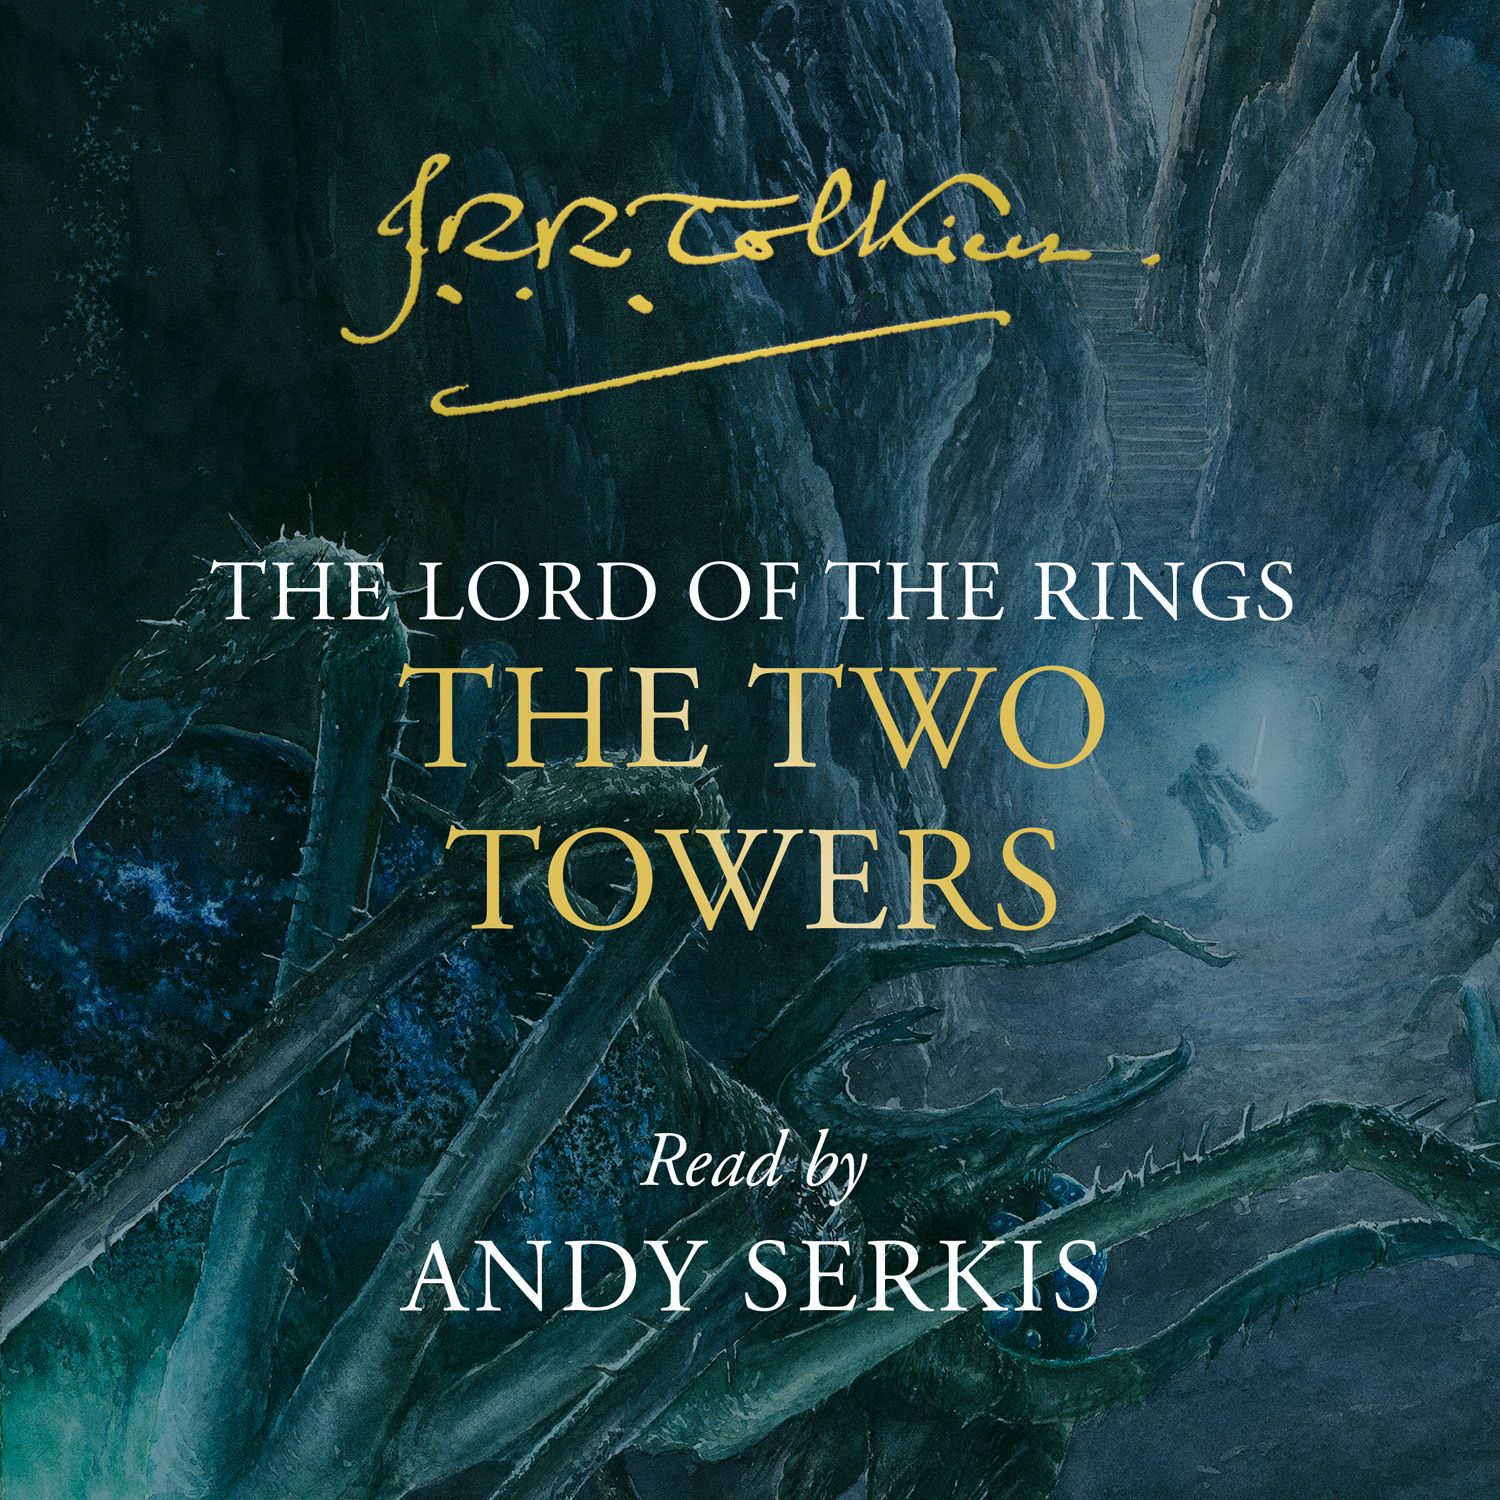 The Lord of the Rings - The Two Towers (The Lord of the Rings, Book 2) -  HarperReach